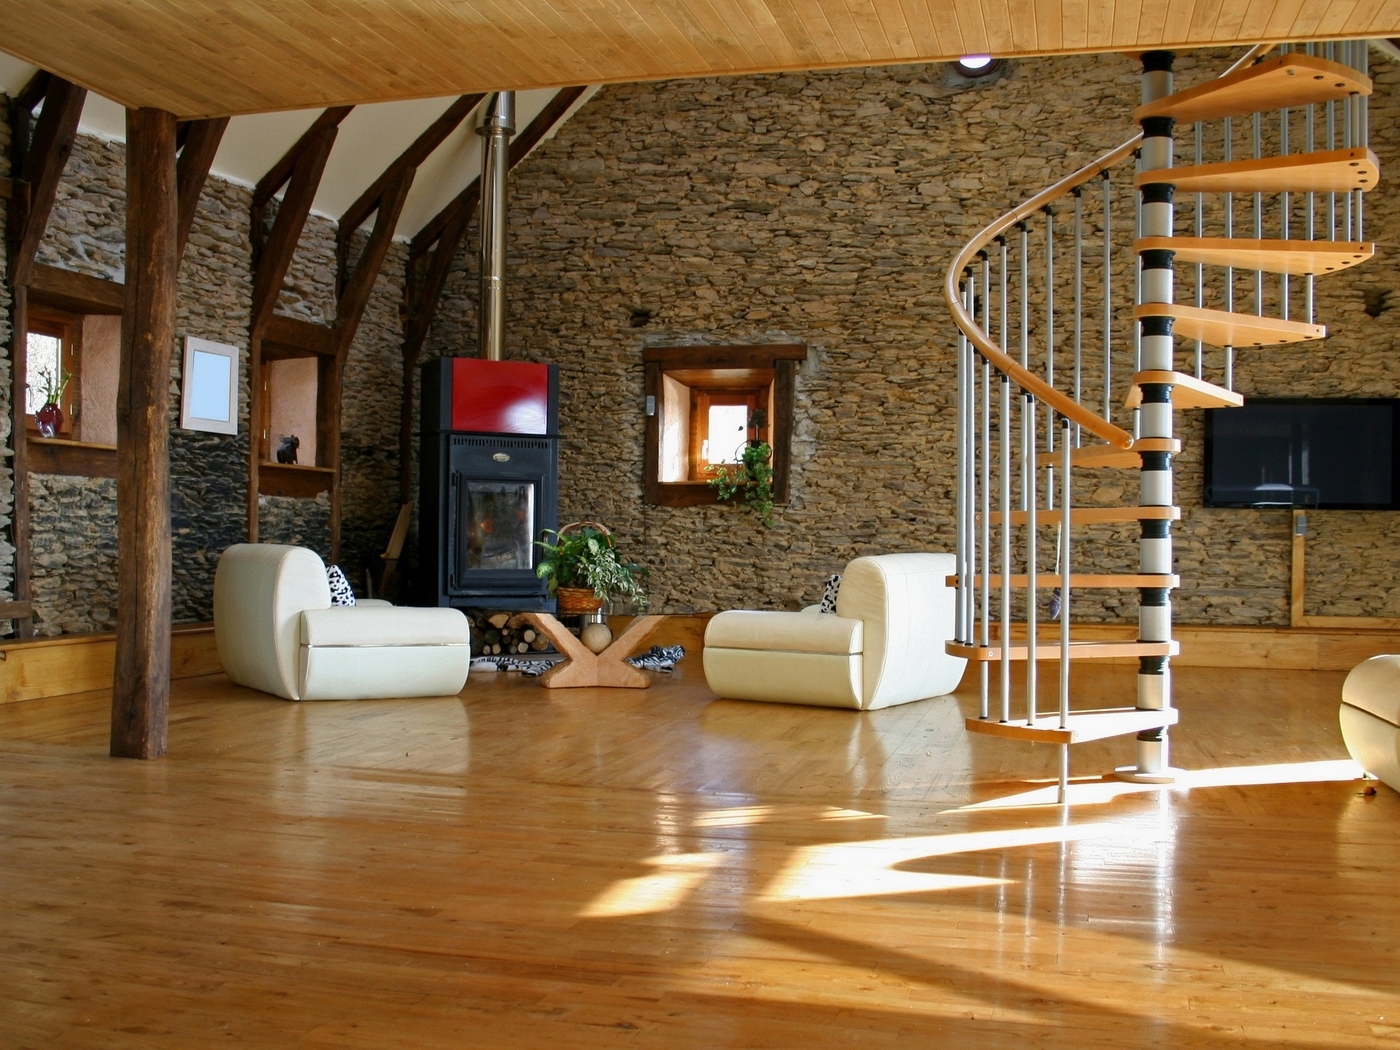 Image: Living room, stairs, chairs, TV, wall, floor, fireplace